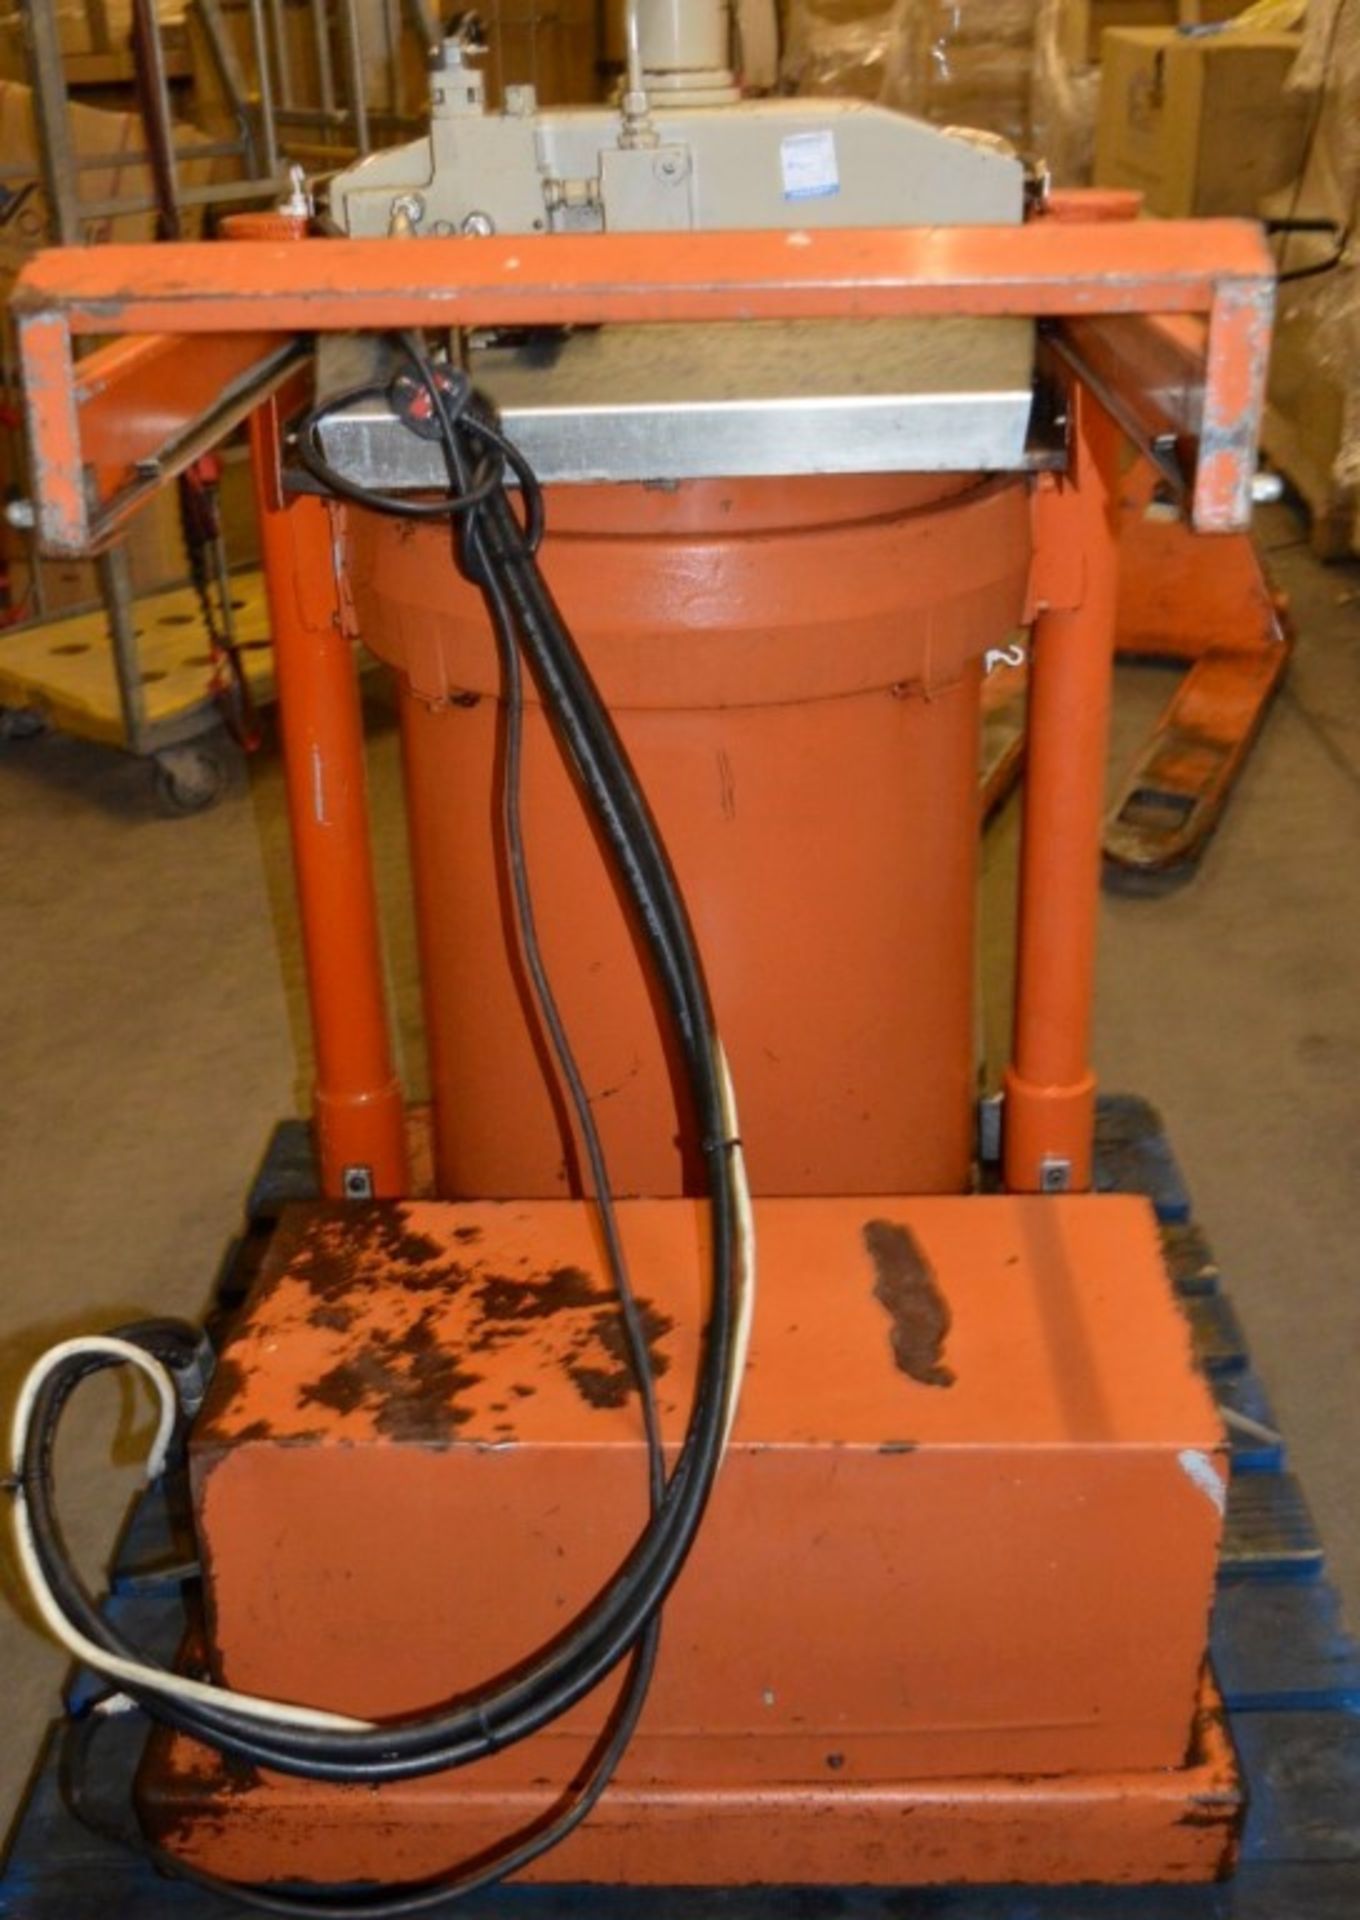 1 x Orwak 5030 Waste Compactor - Used For Compacting Recyclable or Non-Recyclable Waste - - Image 2 of 4